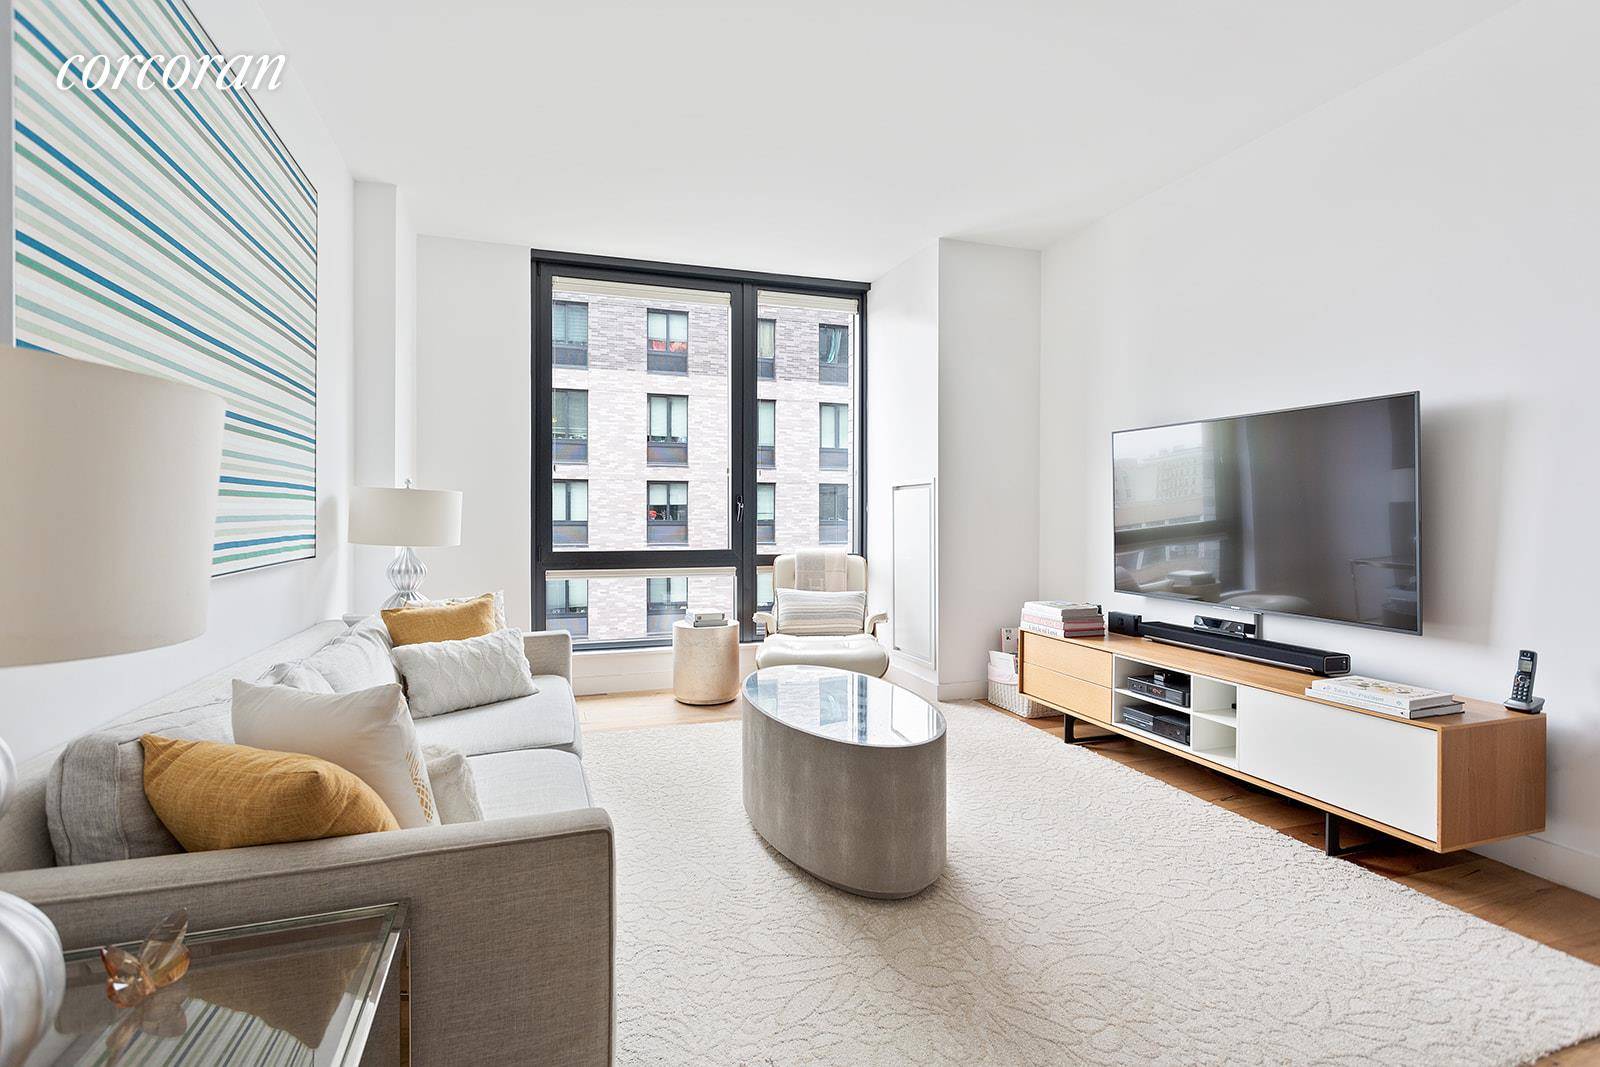 The Adeline, 23 West 116th Street, 6A offers an exceptional opportunity !